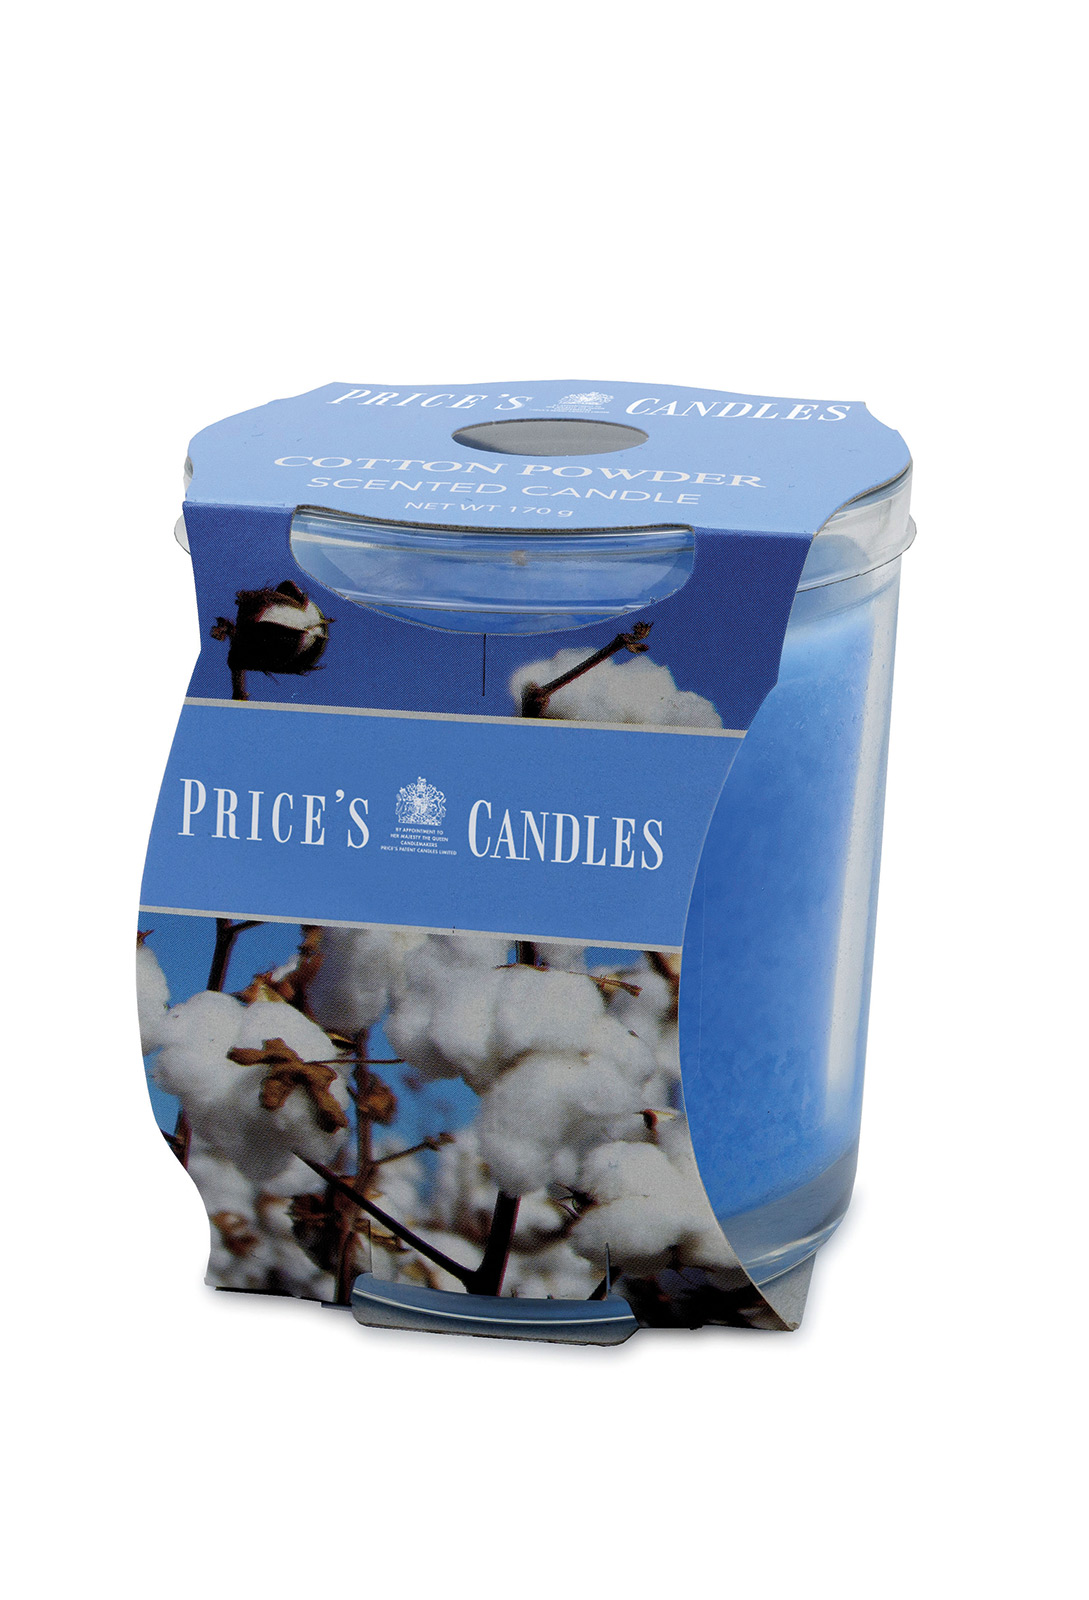 Prices Candle "Cotton Powder" 170g    